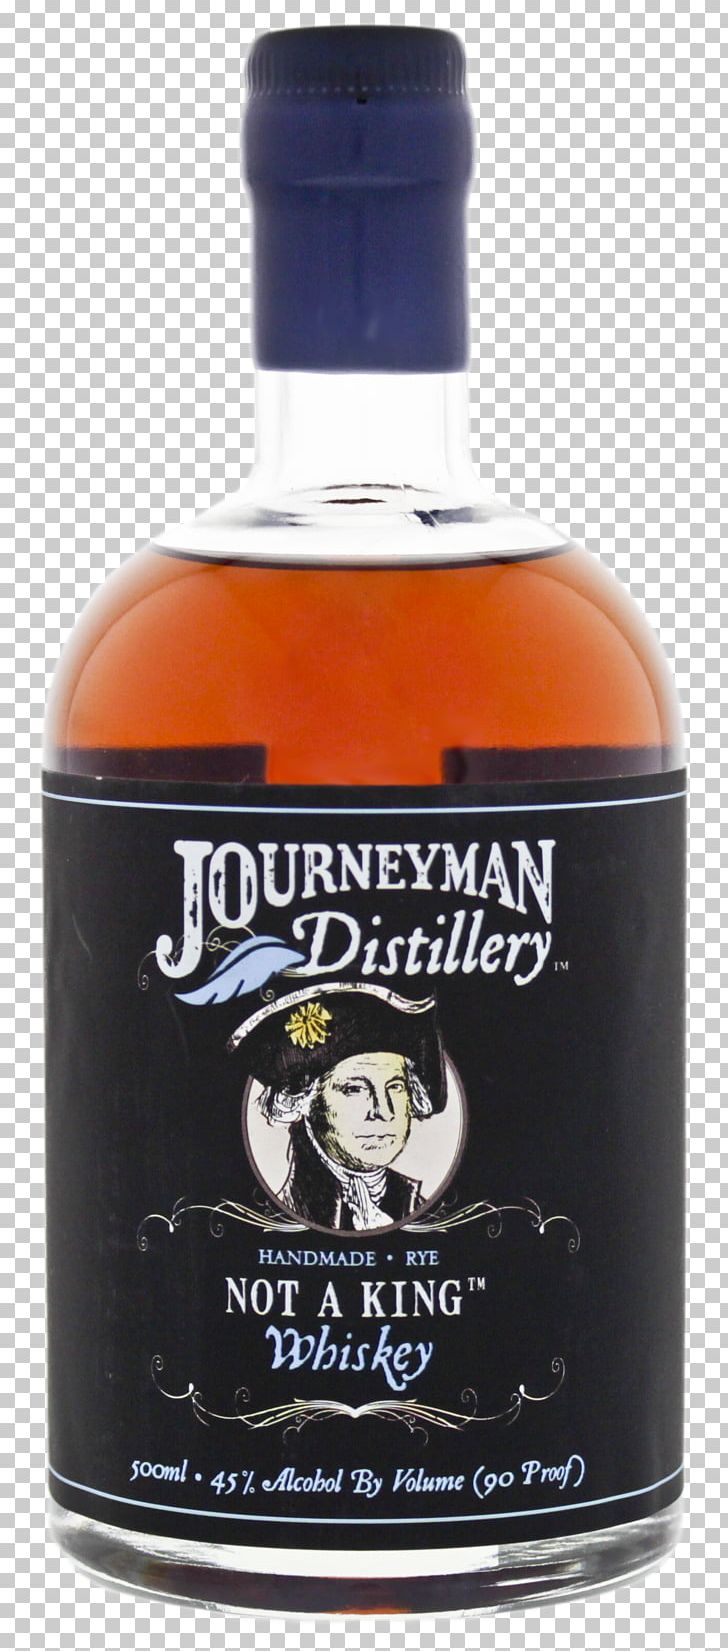 Tennessee Whiskey Journeyman Distillery Liqueur Dessert Wine PNG, Clipart, Alcoholic Beverage, Bilberry, Dessert, Dessert Wine, Distilled Beverage Free PNG Download